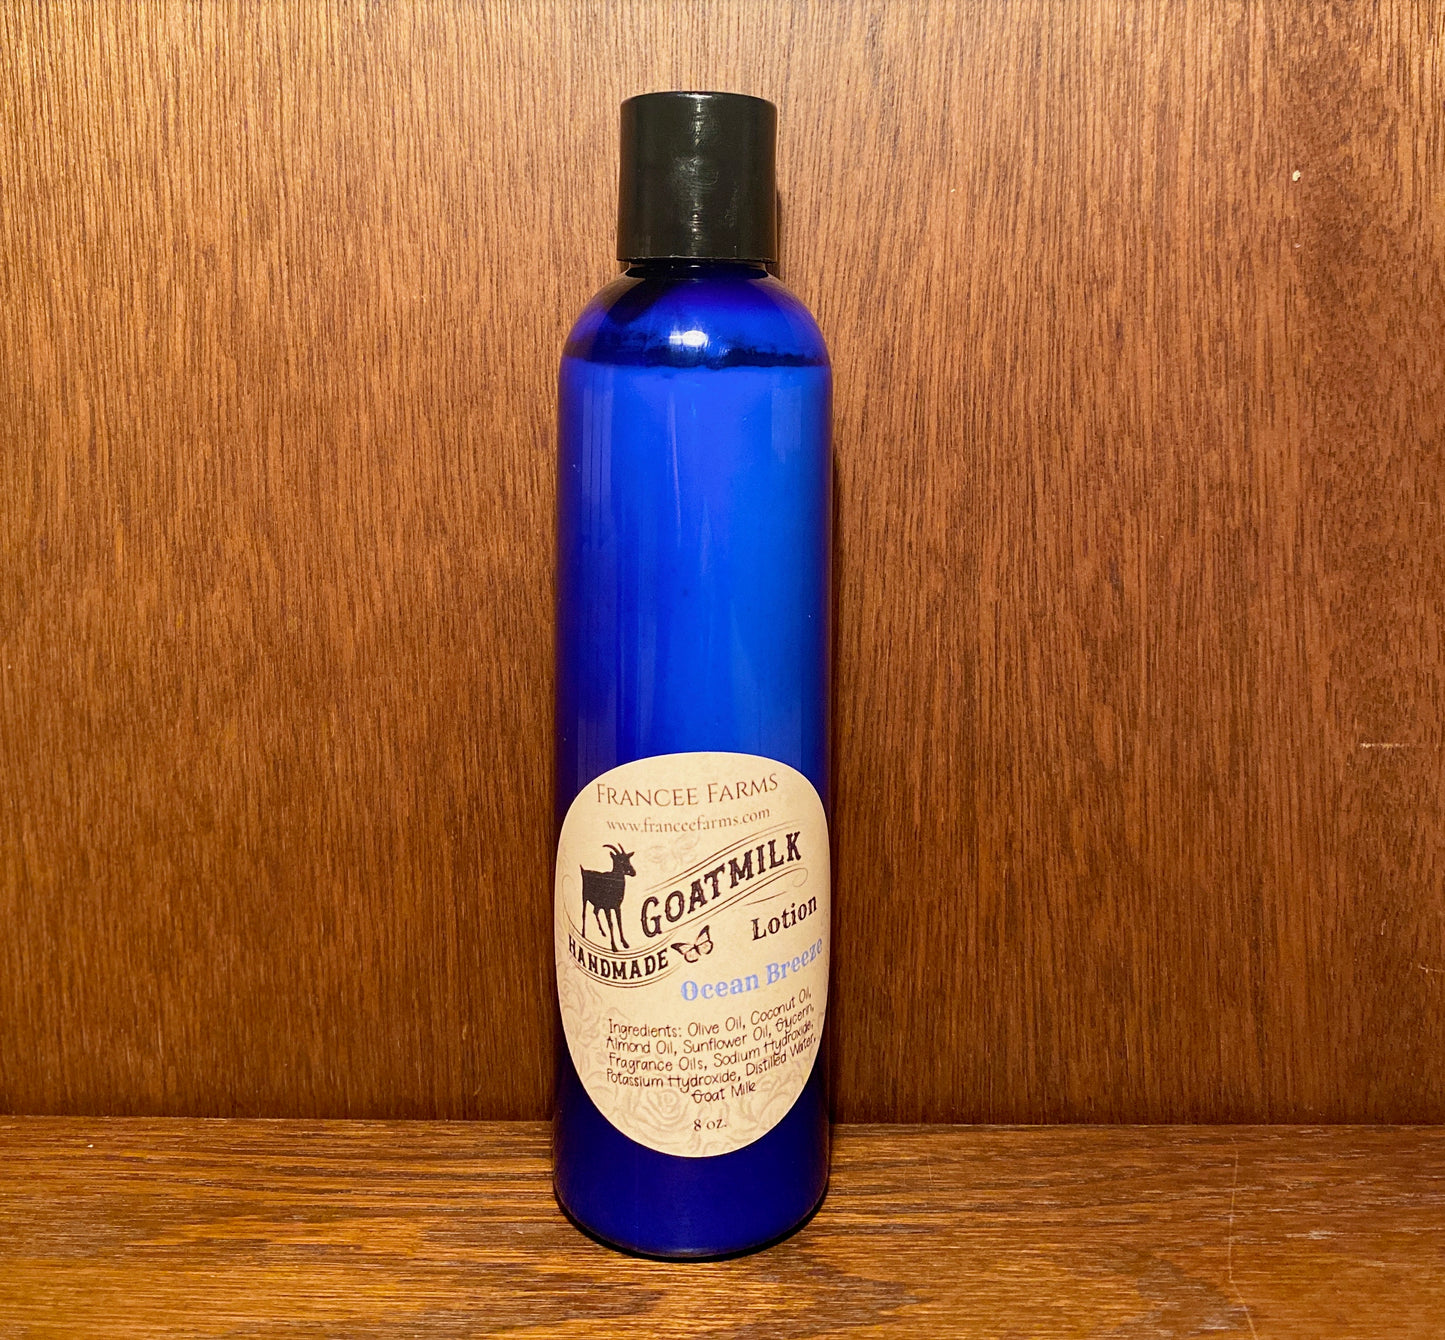 Ocean Breeze Lotion made with Goat Milk Francee Farms